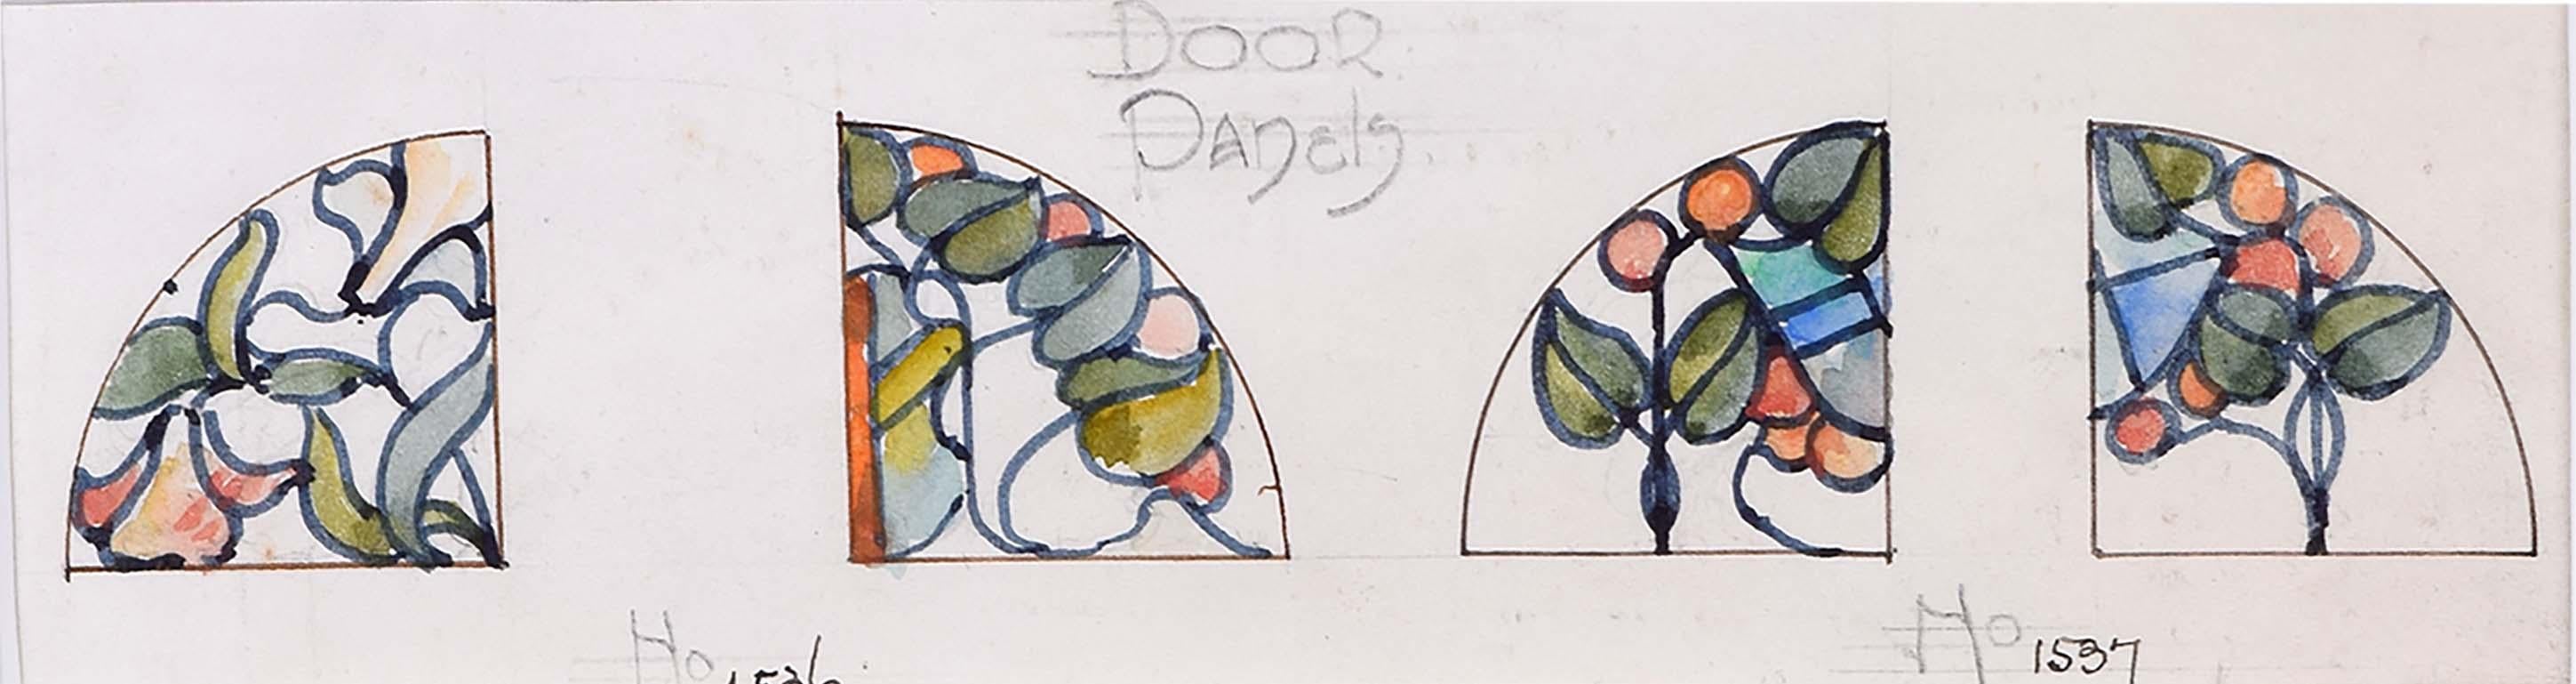 Stained Glass Window Design for Door Panels TW Camm Florence Camm Watercolour